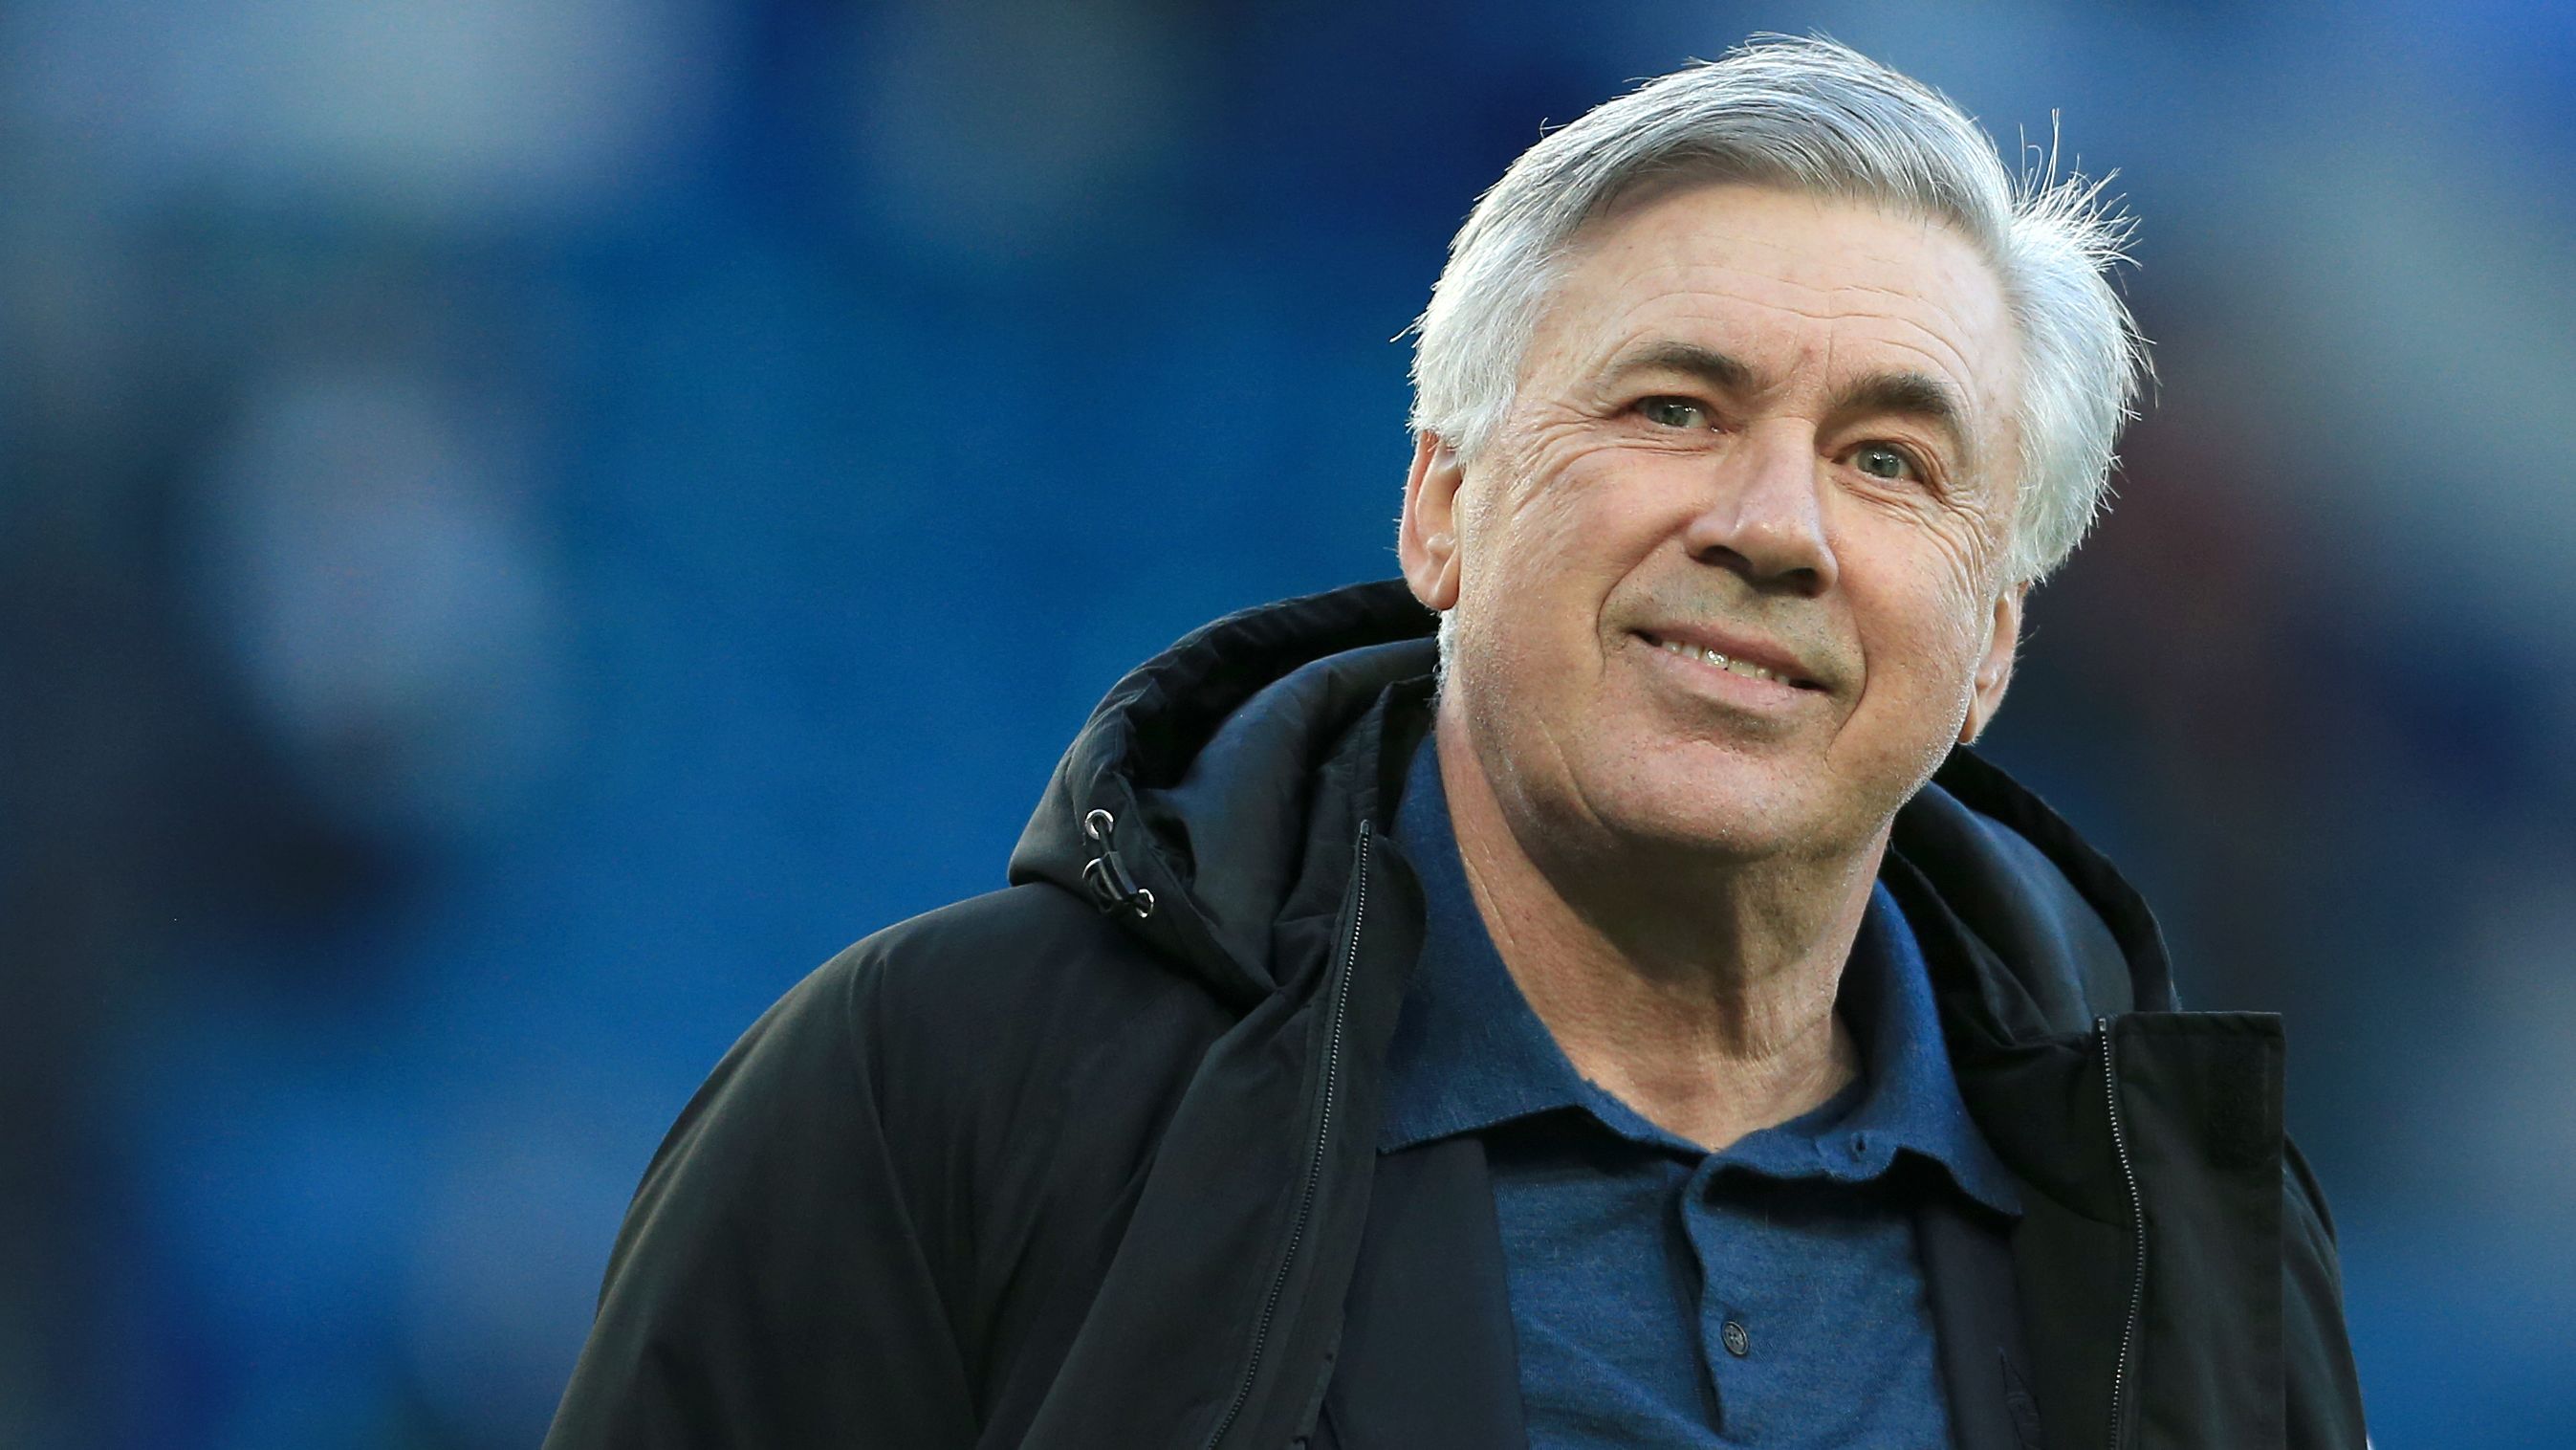 Everton manager Carlo Ancelotti smiles after the Premier League match against Wolverhampton Wanderers at Goodison Park on May 19, 2021.